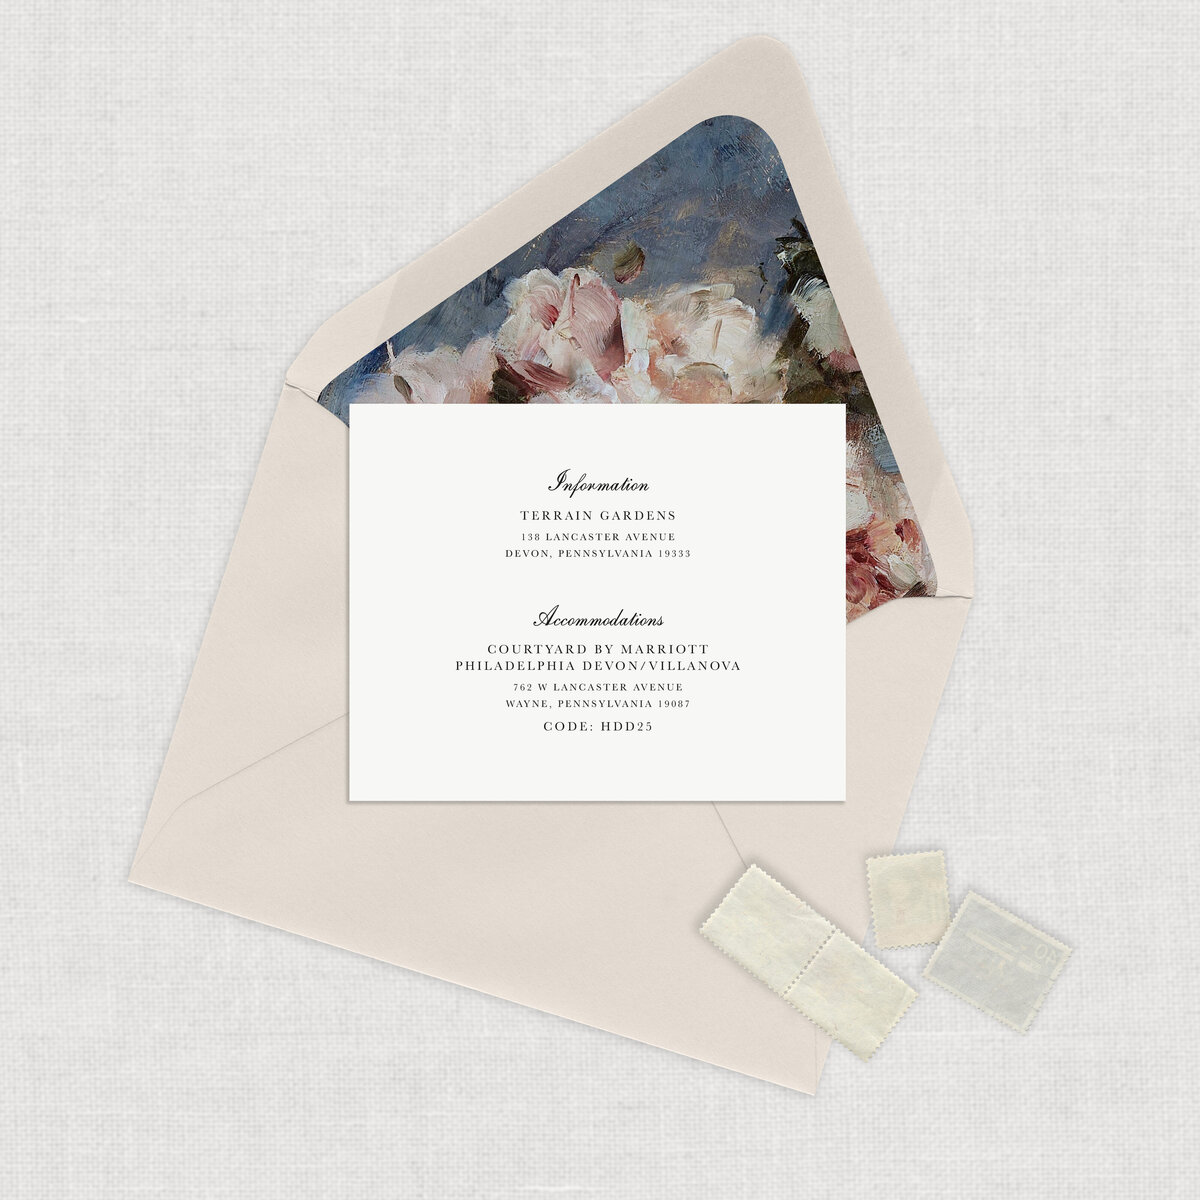 Traditional vintage 1950 wedding invite suite detail card with taupe mailing envelope printed guest address.